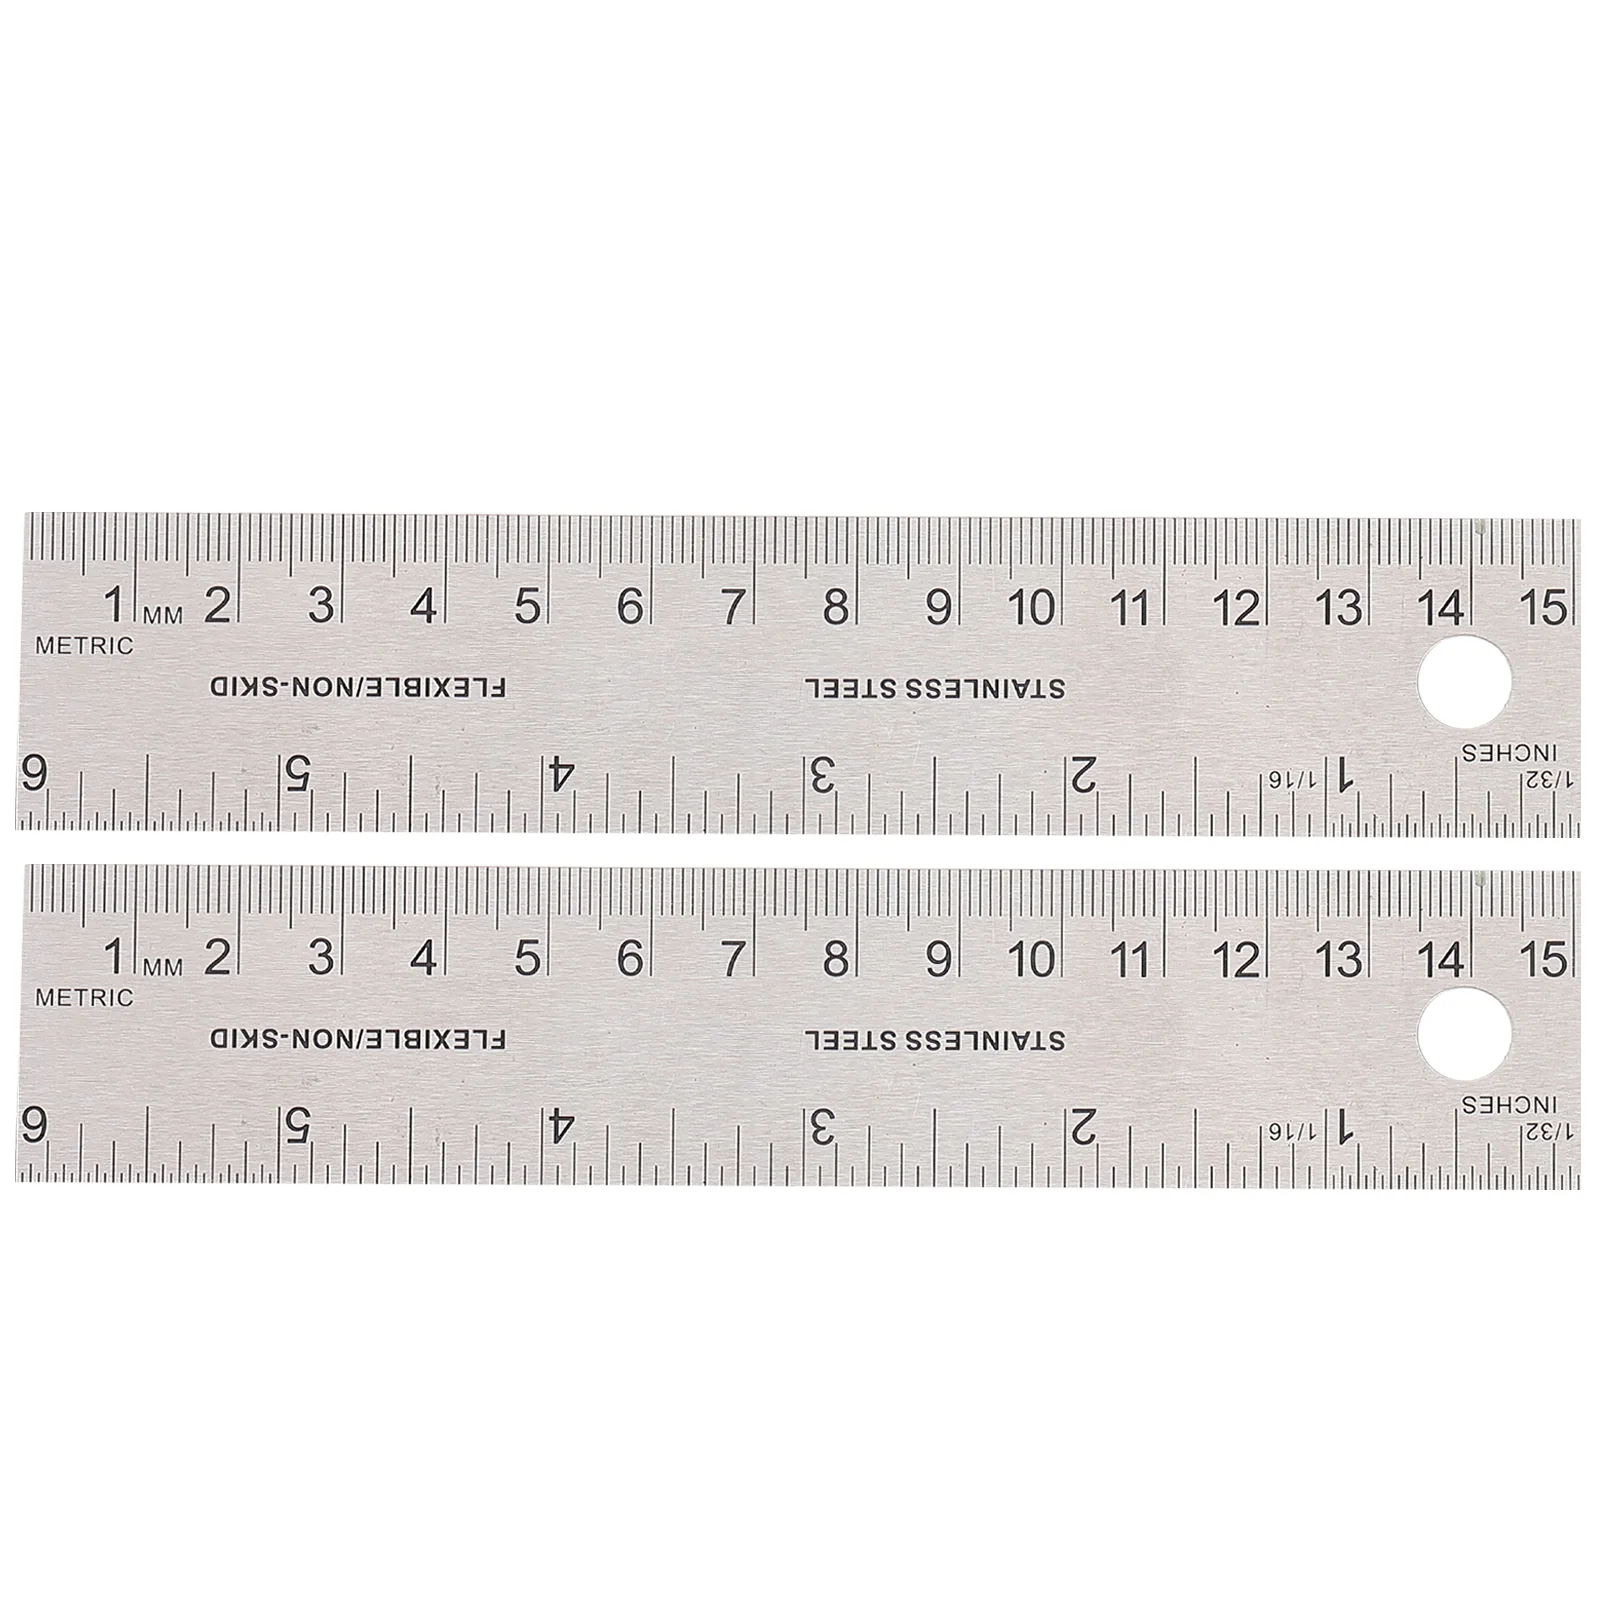 

2 Pcs Cork Stainless Steel Ruler Straight Edges Rulers Corked Engineering Back Machinist Tools Wooden Scale Office Millimeter